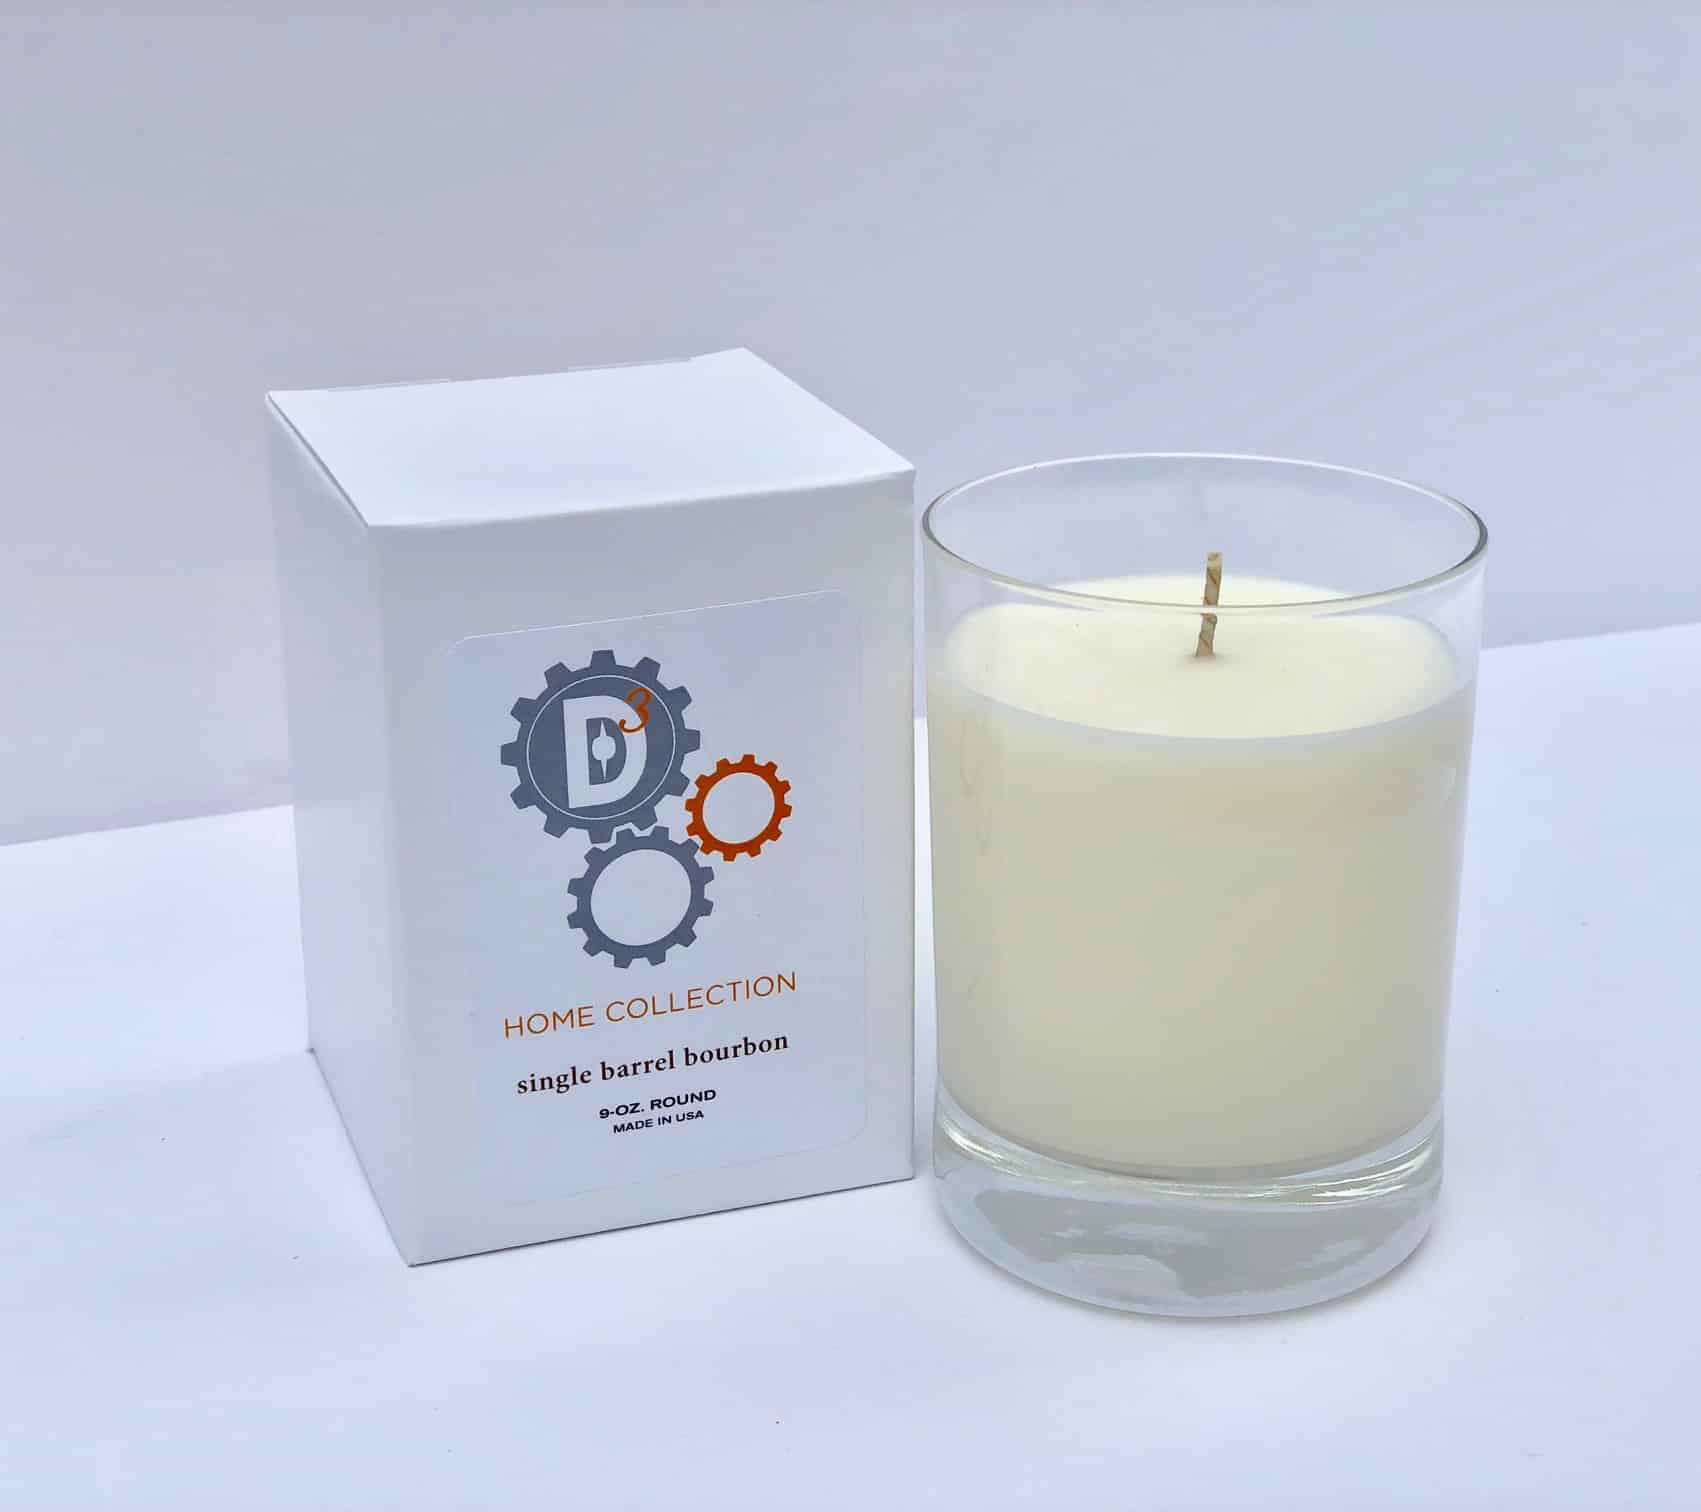 D3 Home Candles